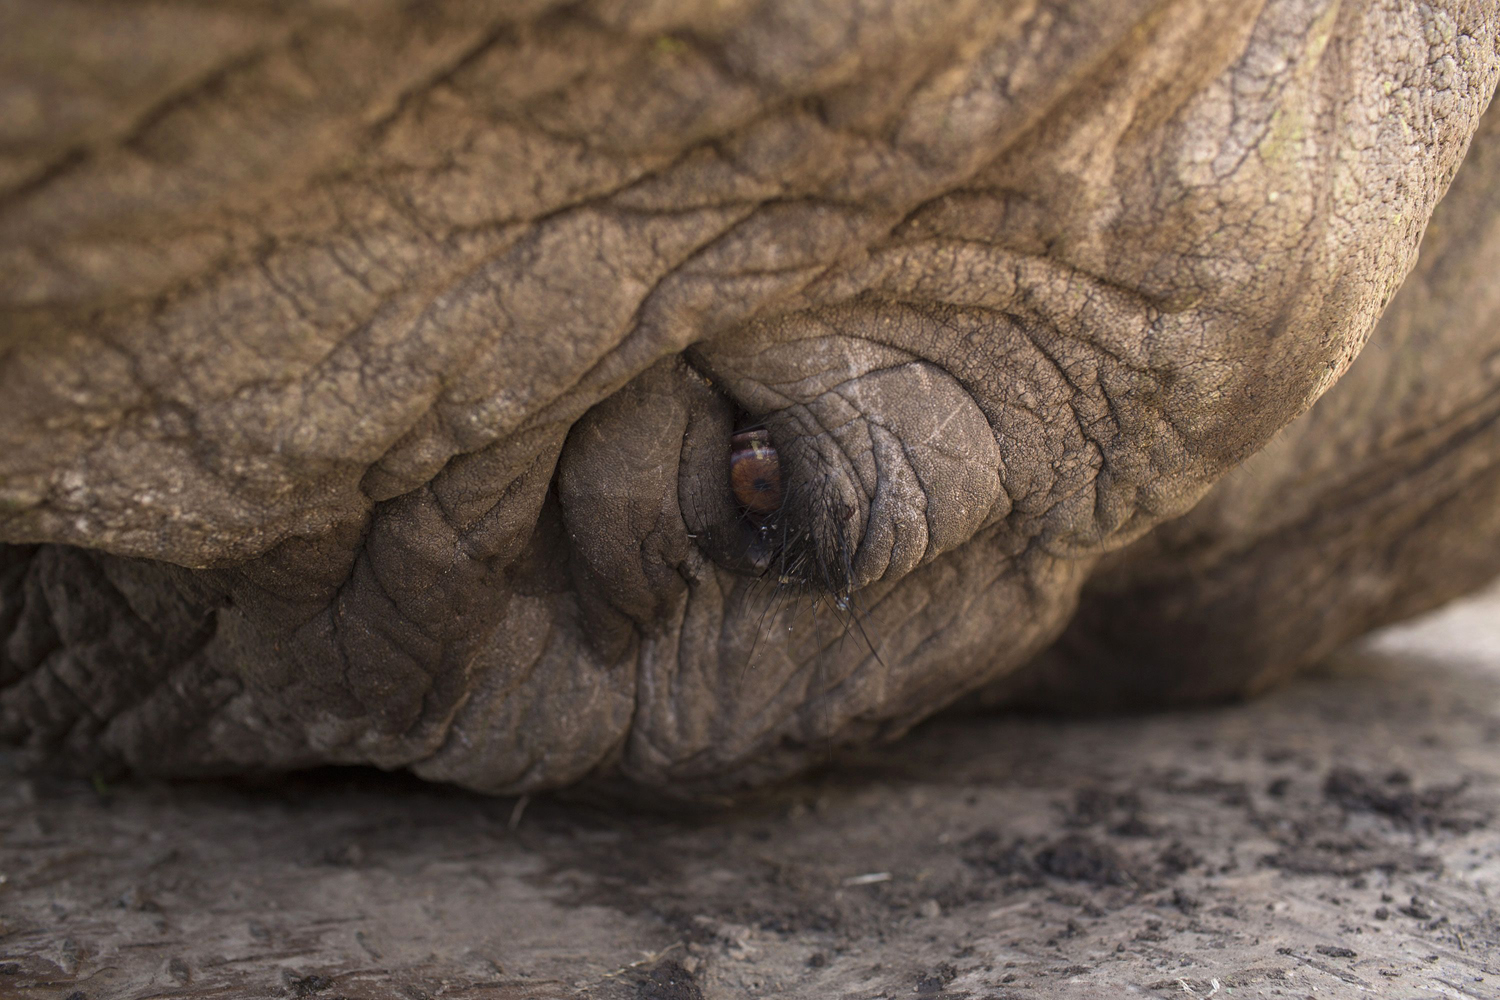 A close-up view of a sedated elephant's eye is seen as it is secured on the back of a truck by KWS wardens during a relocation exercise on the margins of the Ol Pejeta Conservancy in central Kenya